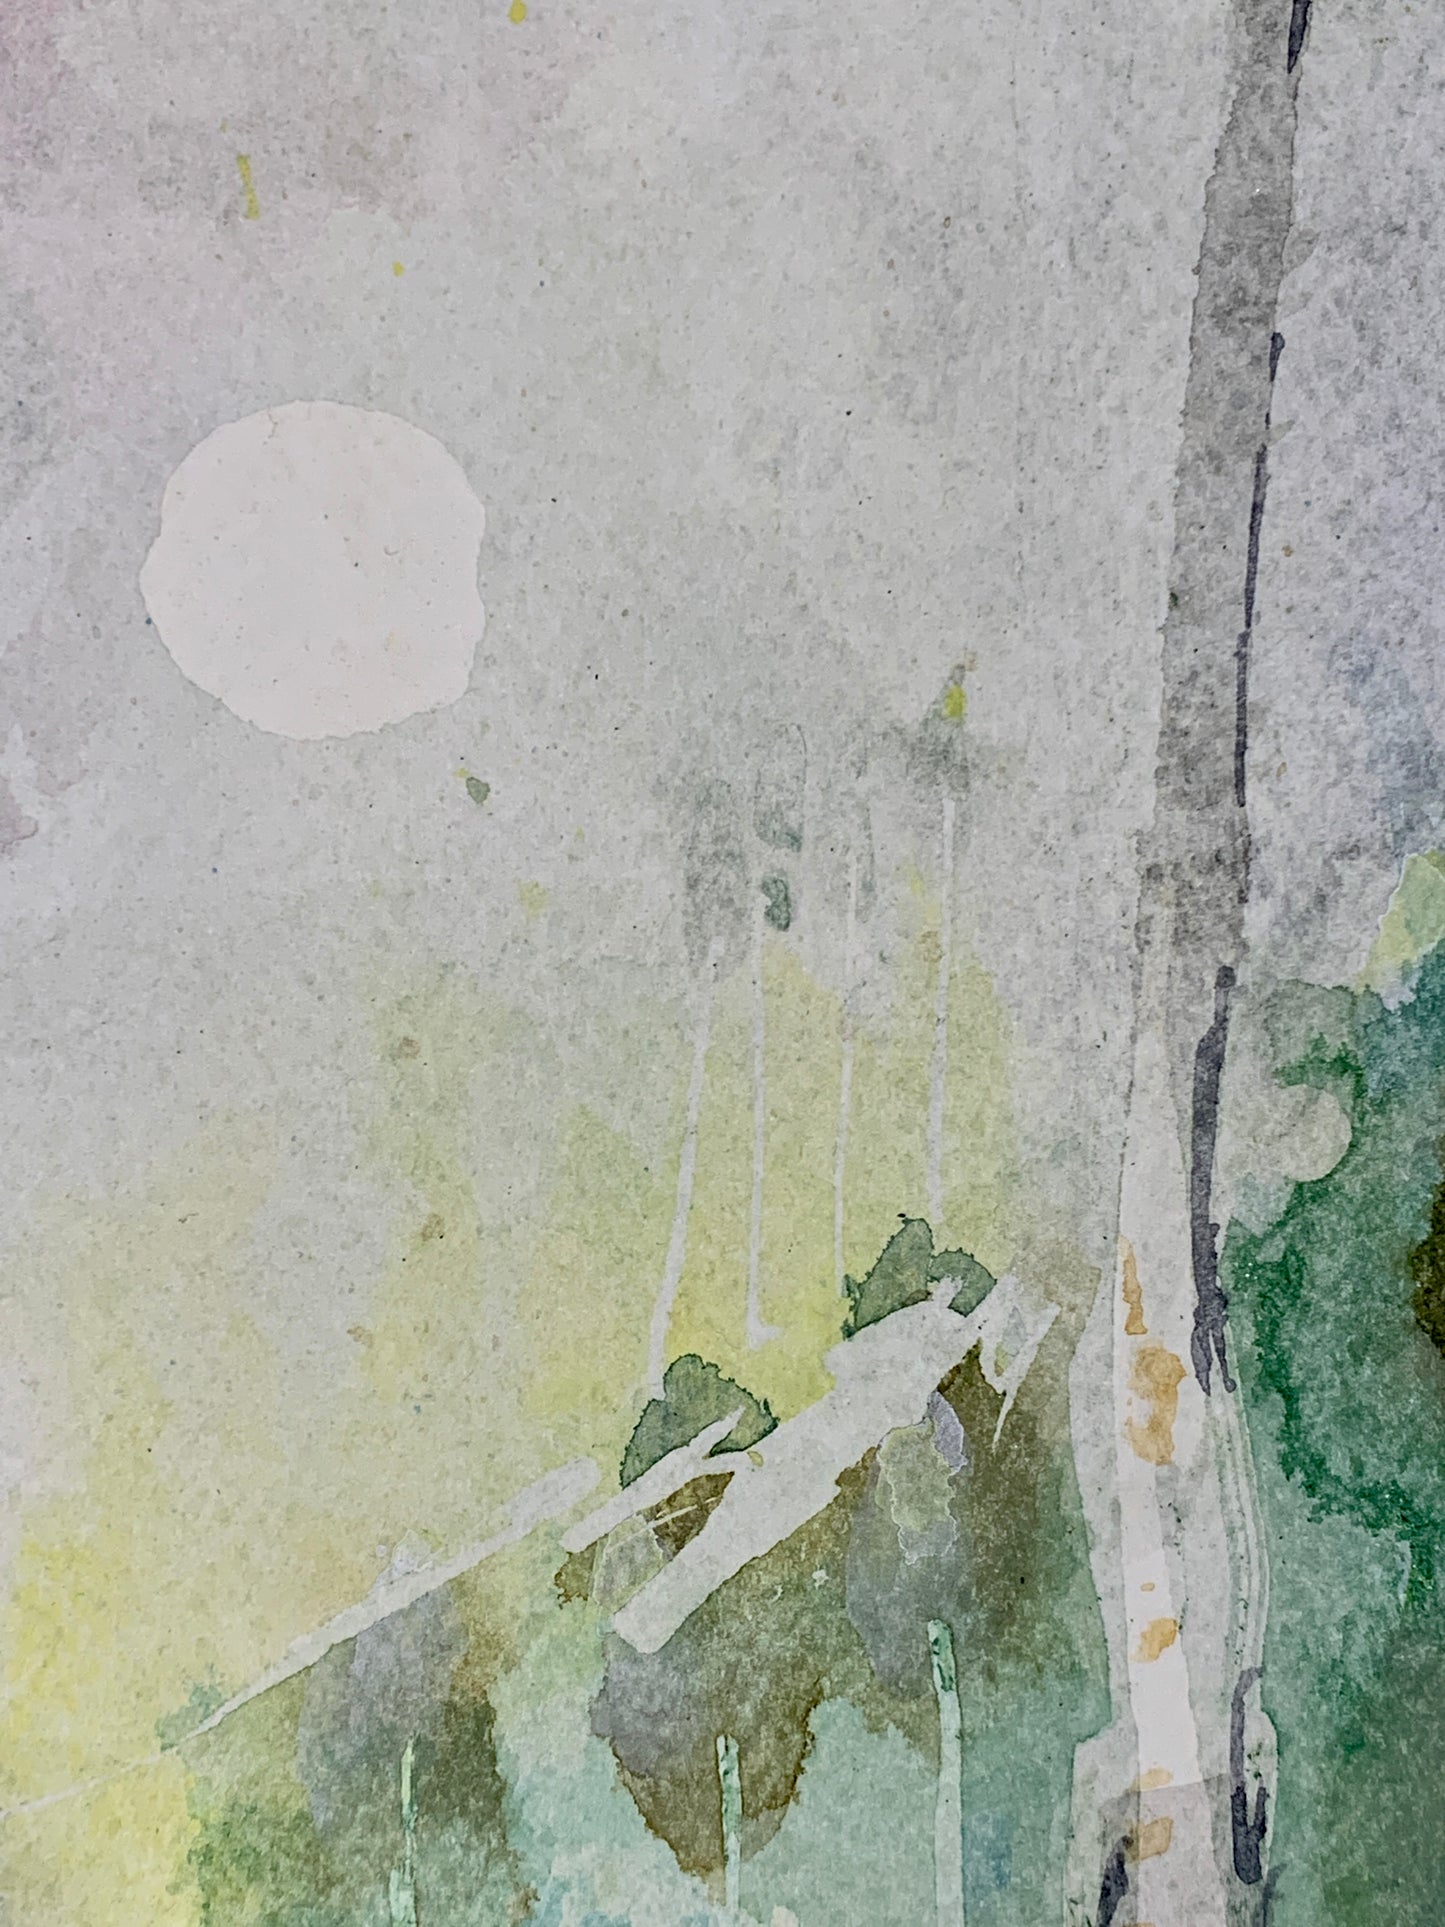 Detailed close up of watercolour technique creating atmosphere